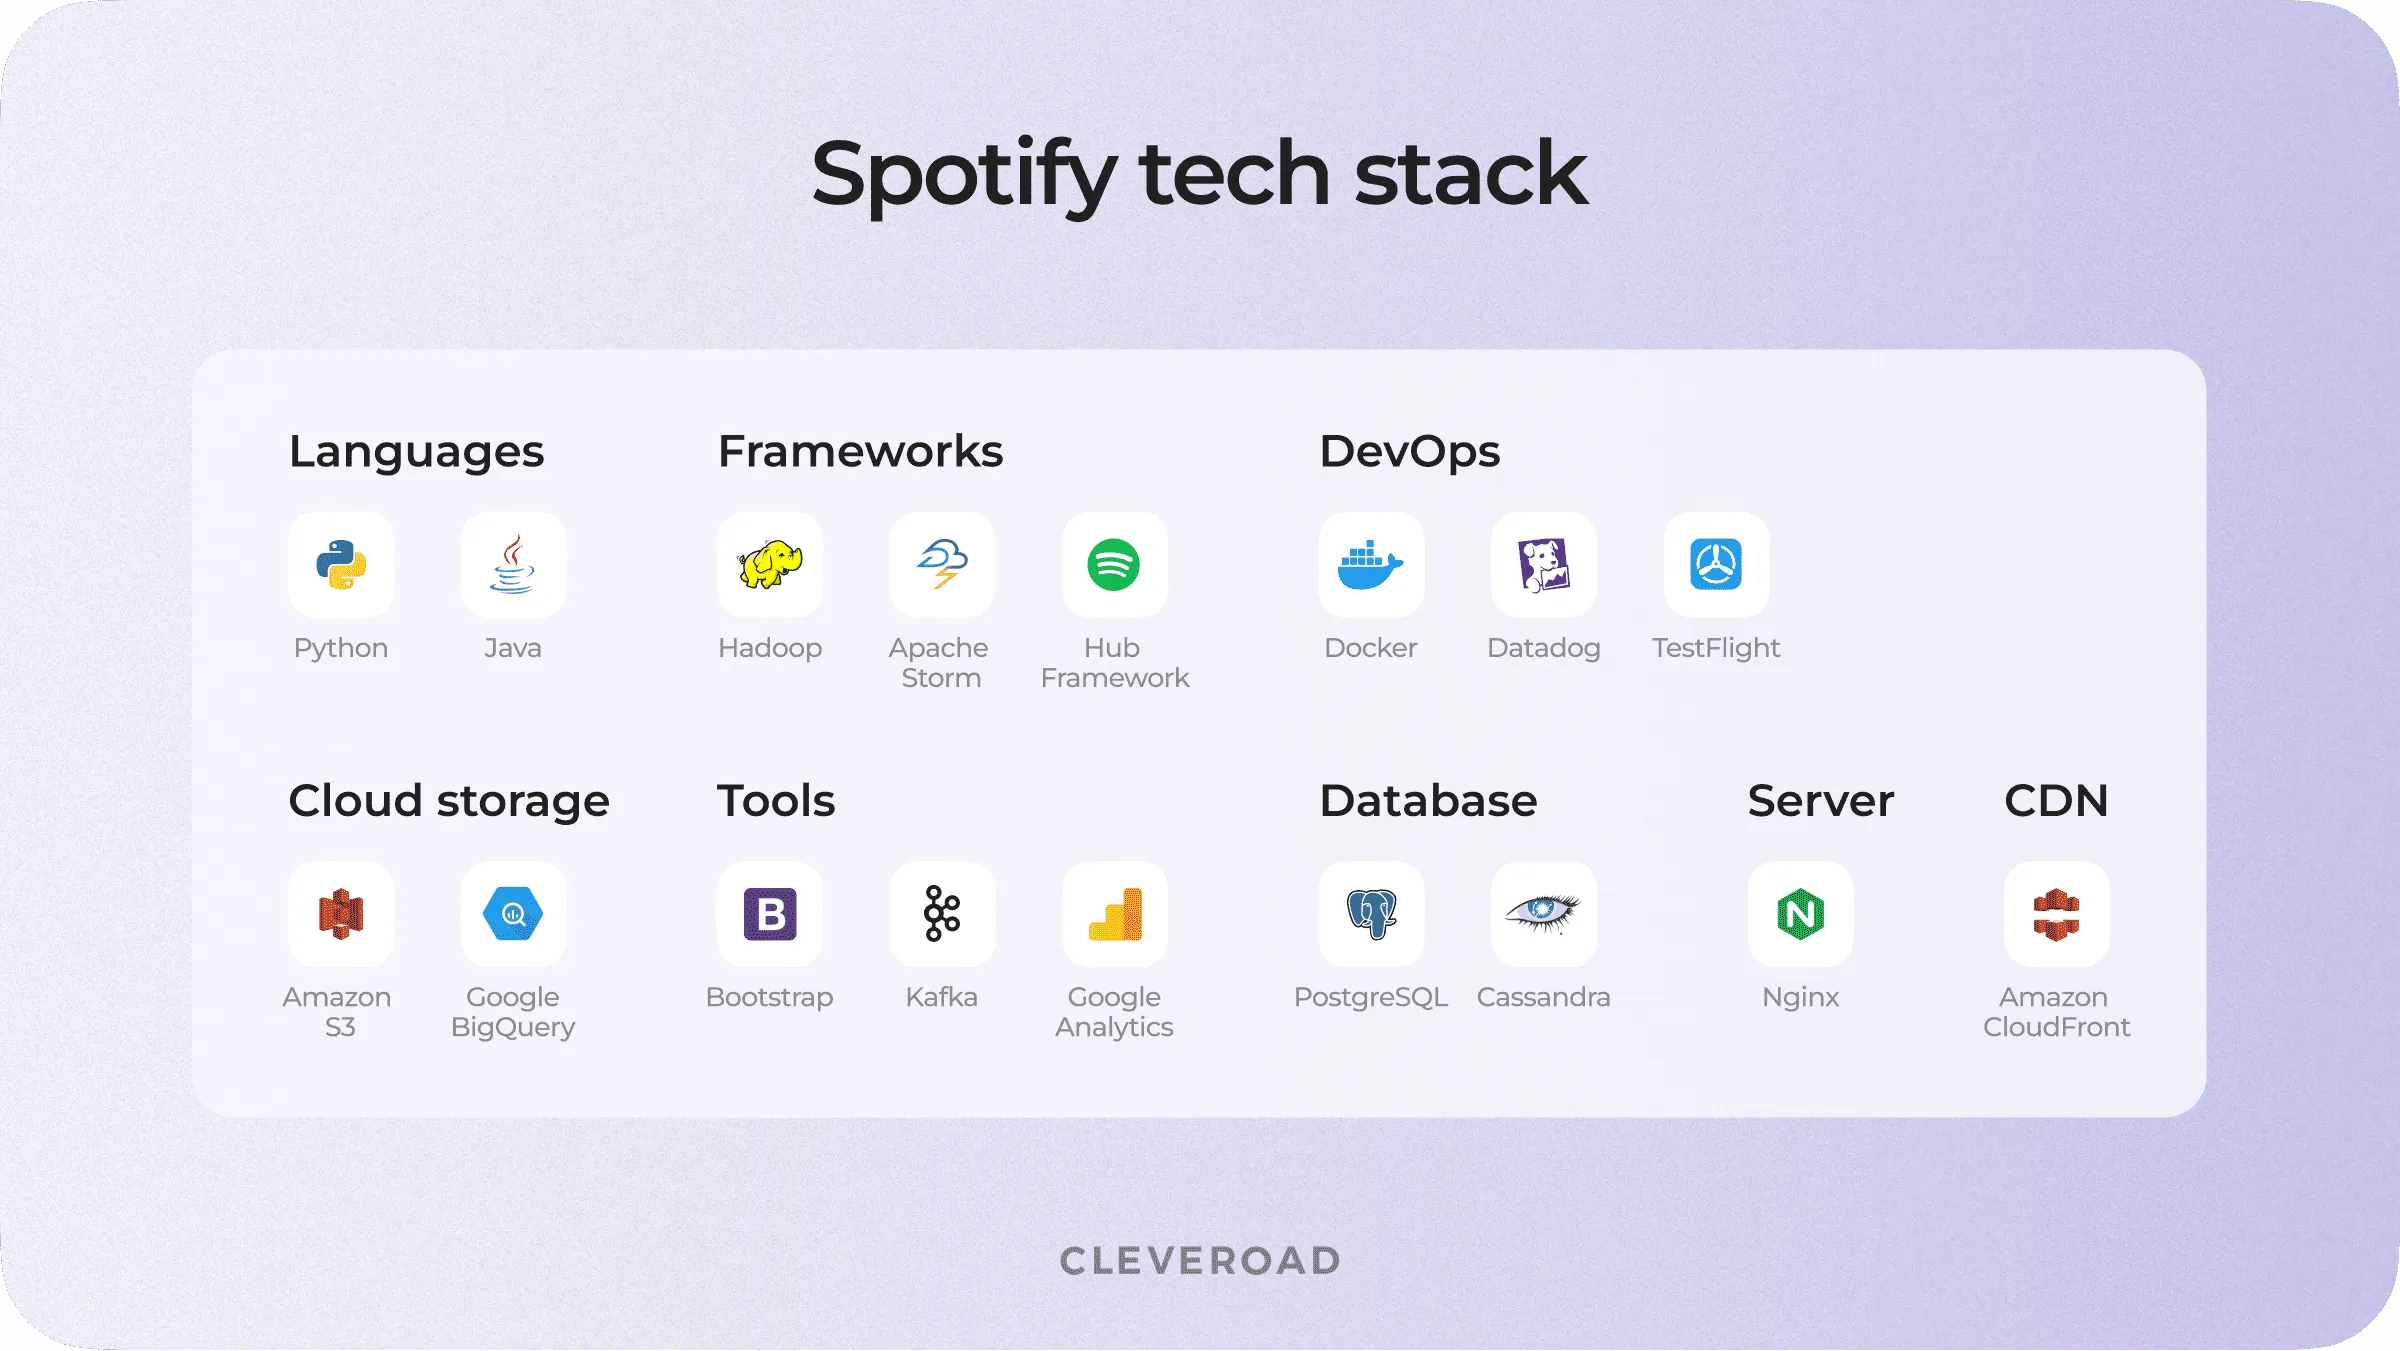 How to create a music streaming app: Spotify tech stacj